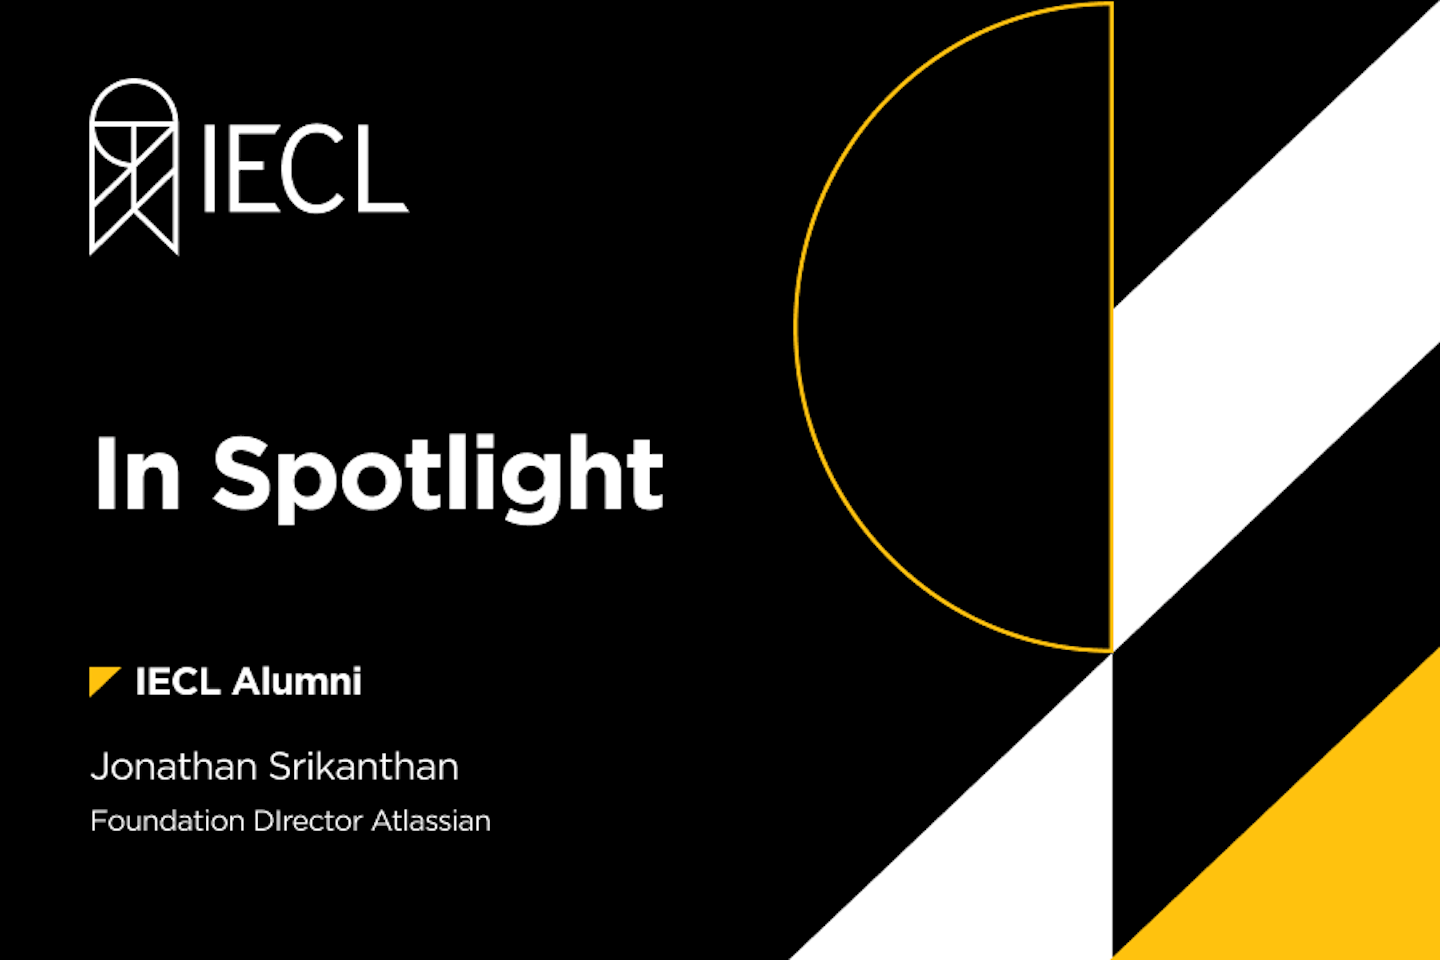 IECL Alumni video from Jonathan Srikanthan, Founder and Director at Atlassian